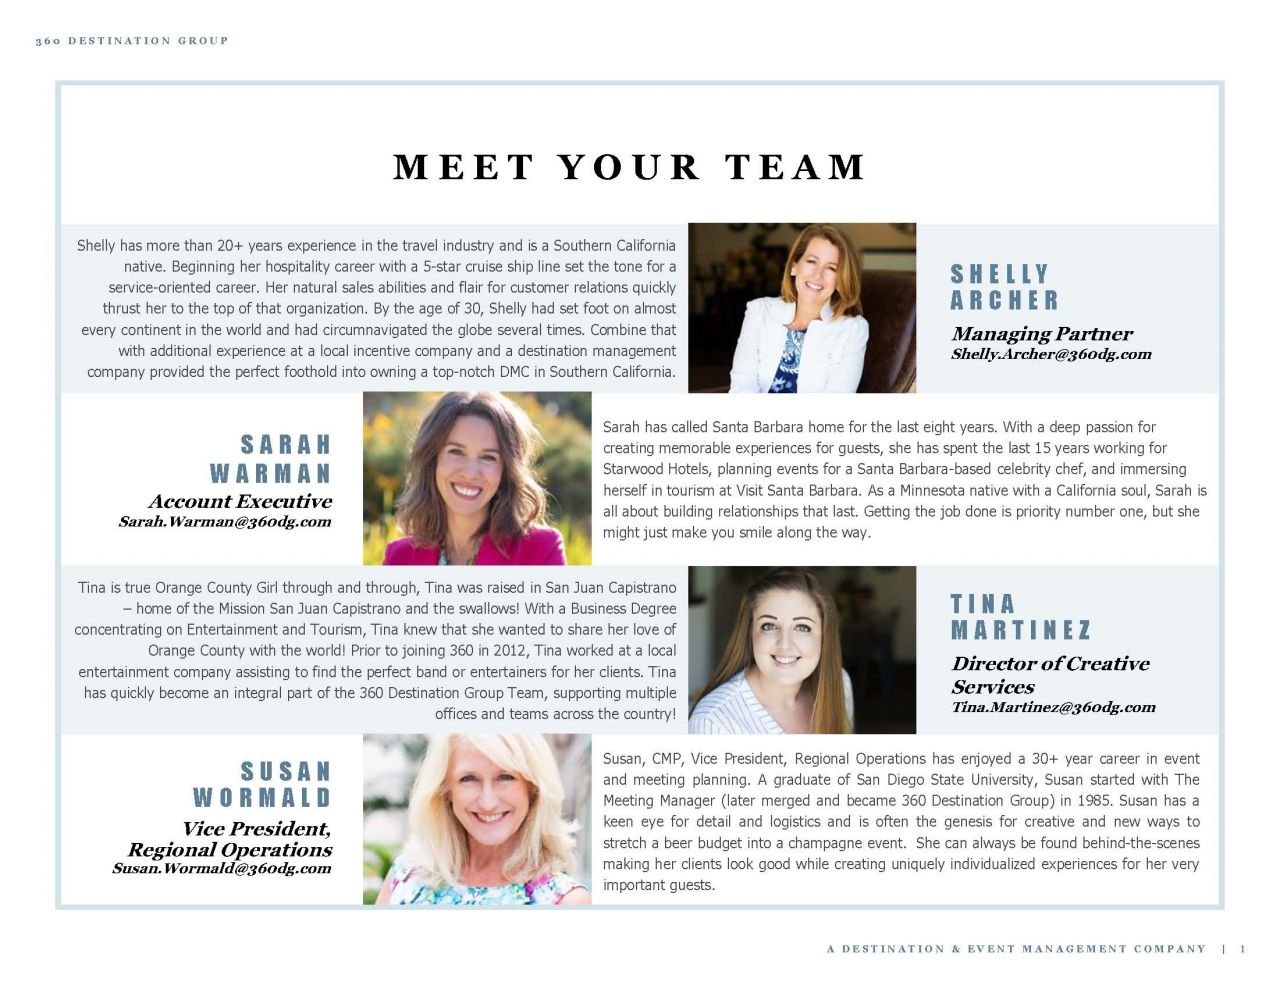 Meet the team graphic with photos and bios